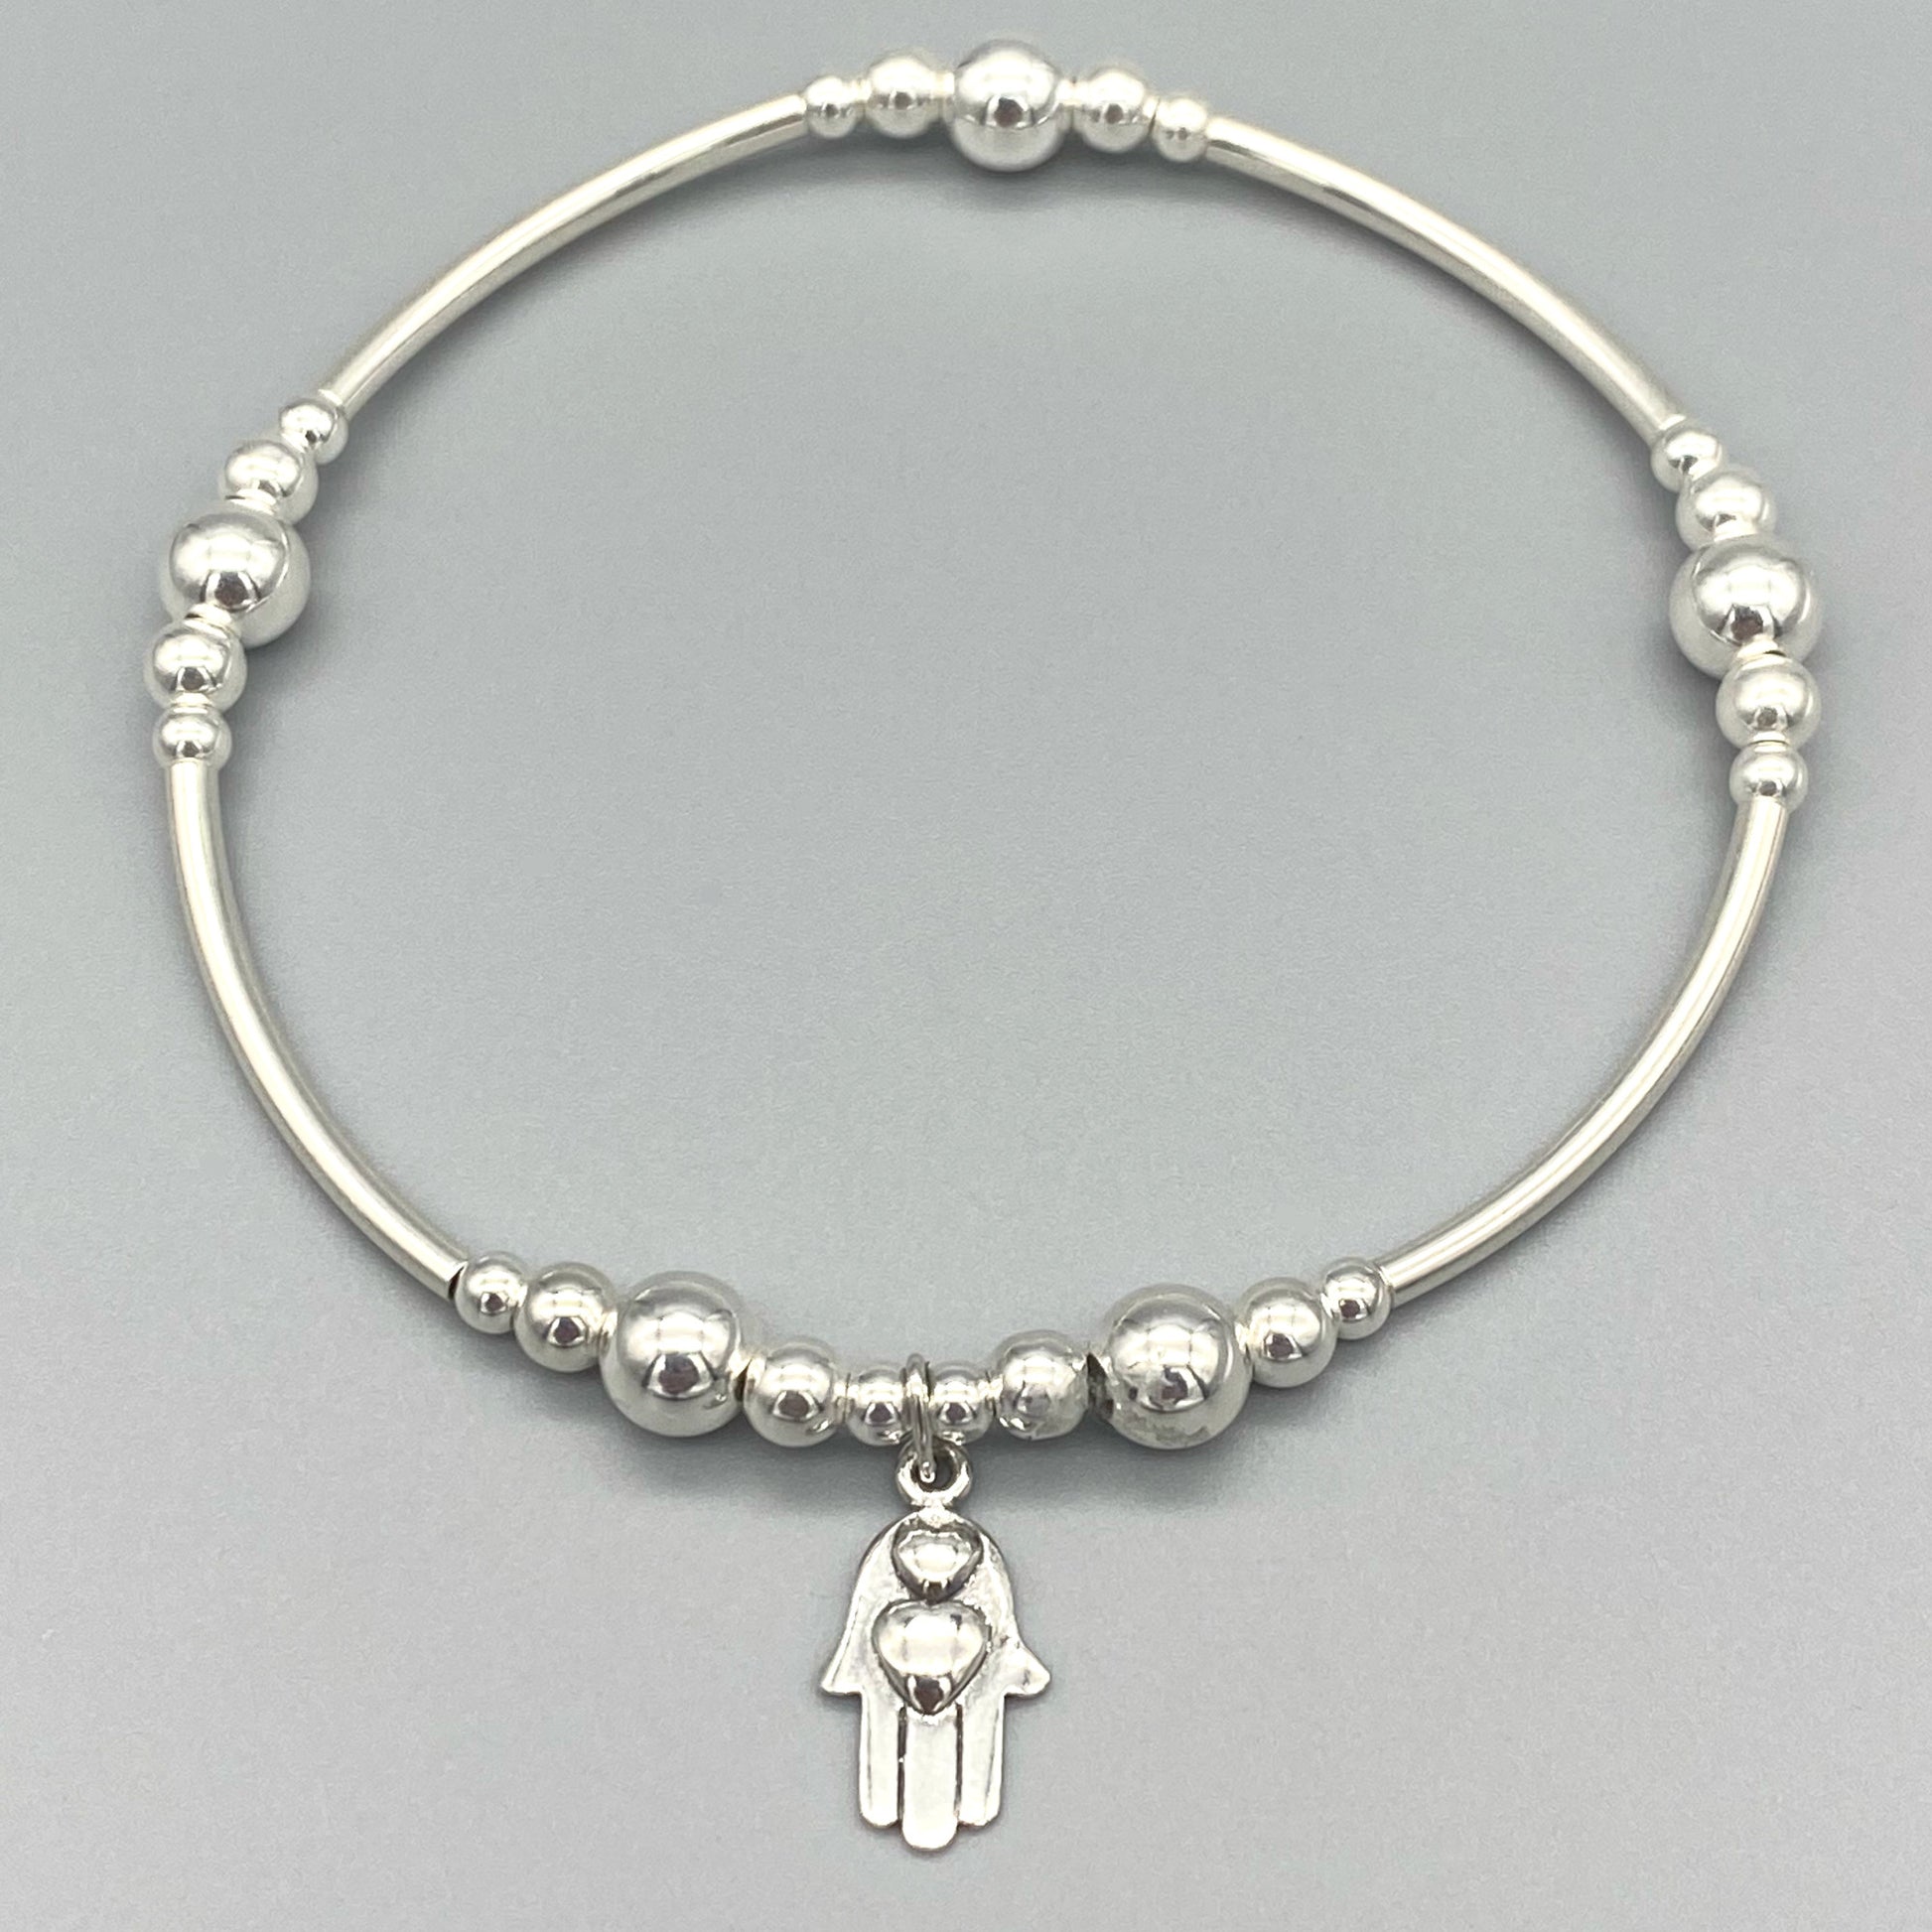 Hamsa hand hearts charm sterling silver stacking bracelet for her by My Silver Wish